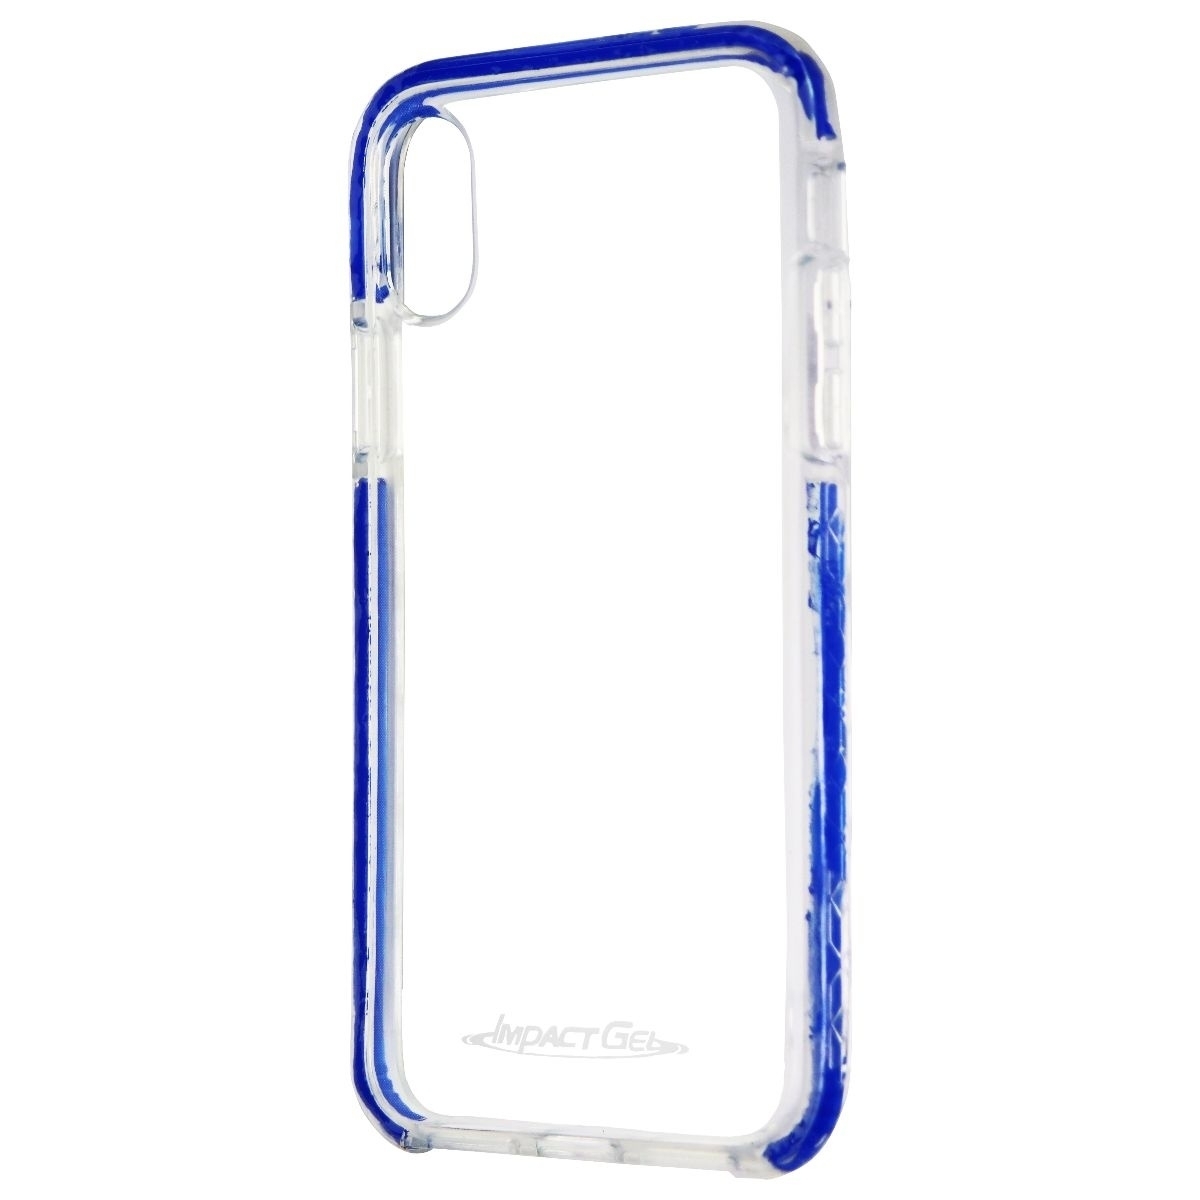 Impact Gel Crusader Lite Series Case For Apple IPhone Xs/X - Blue / Clear